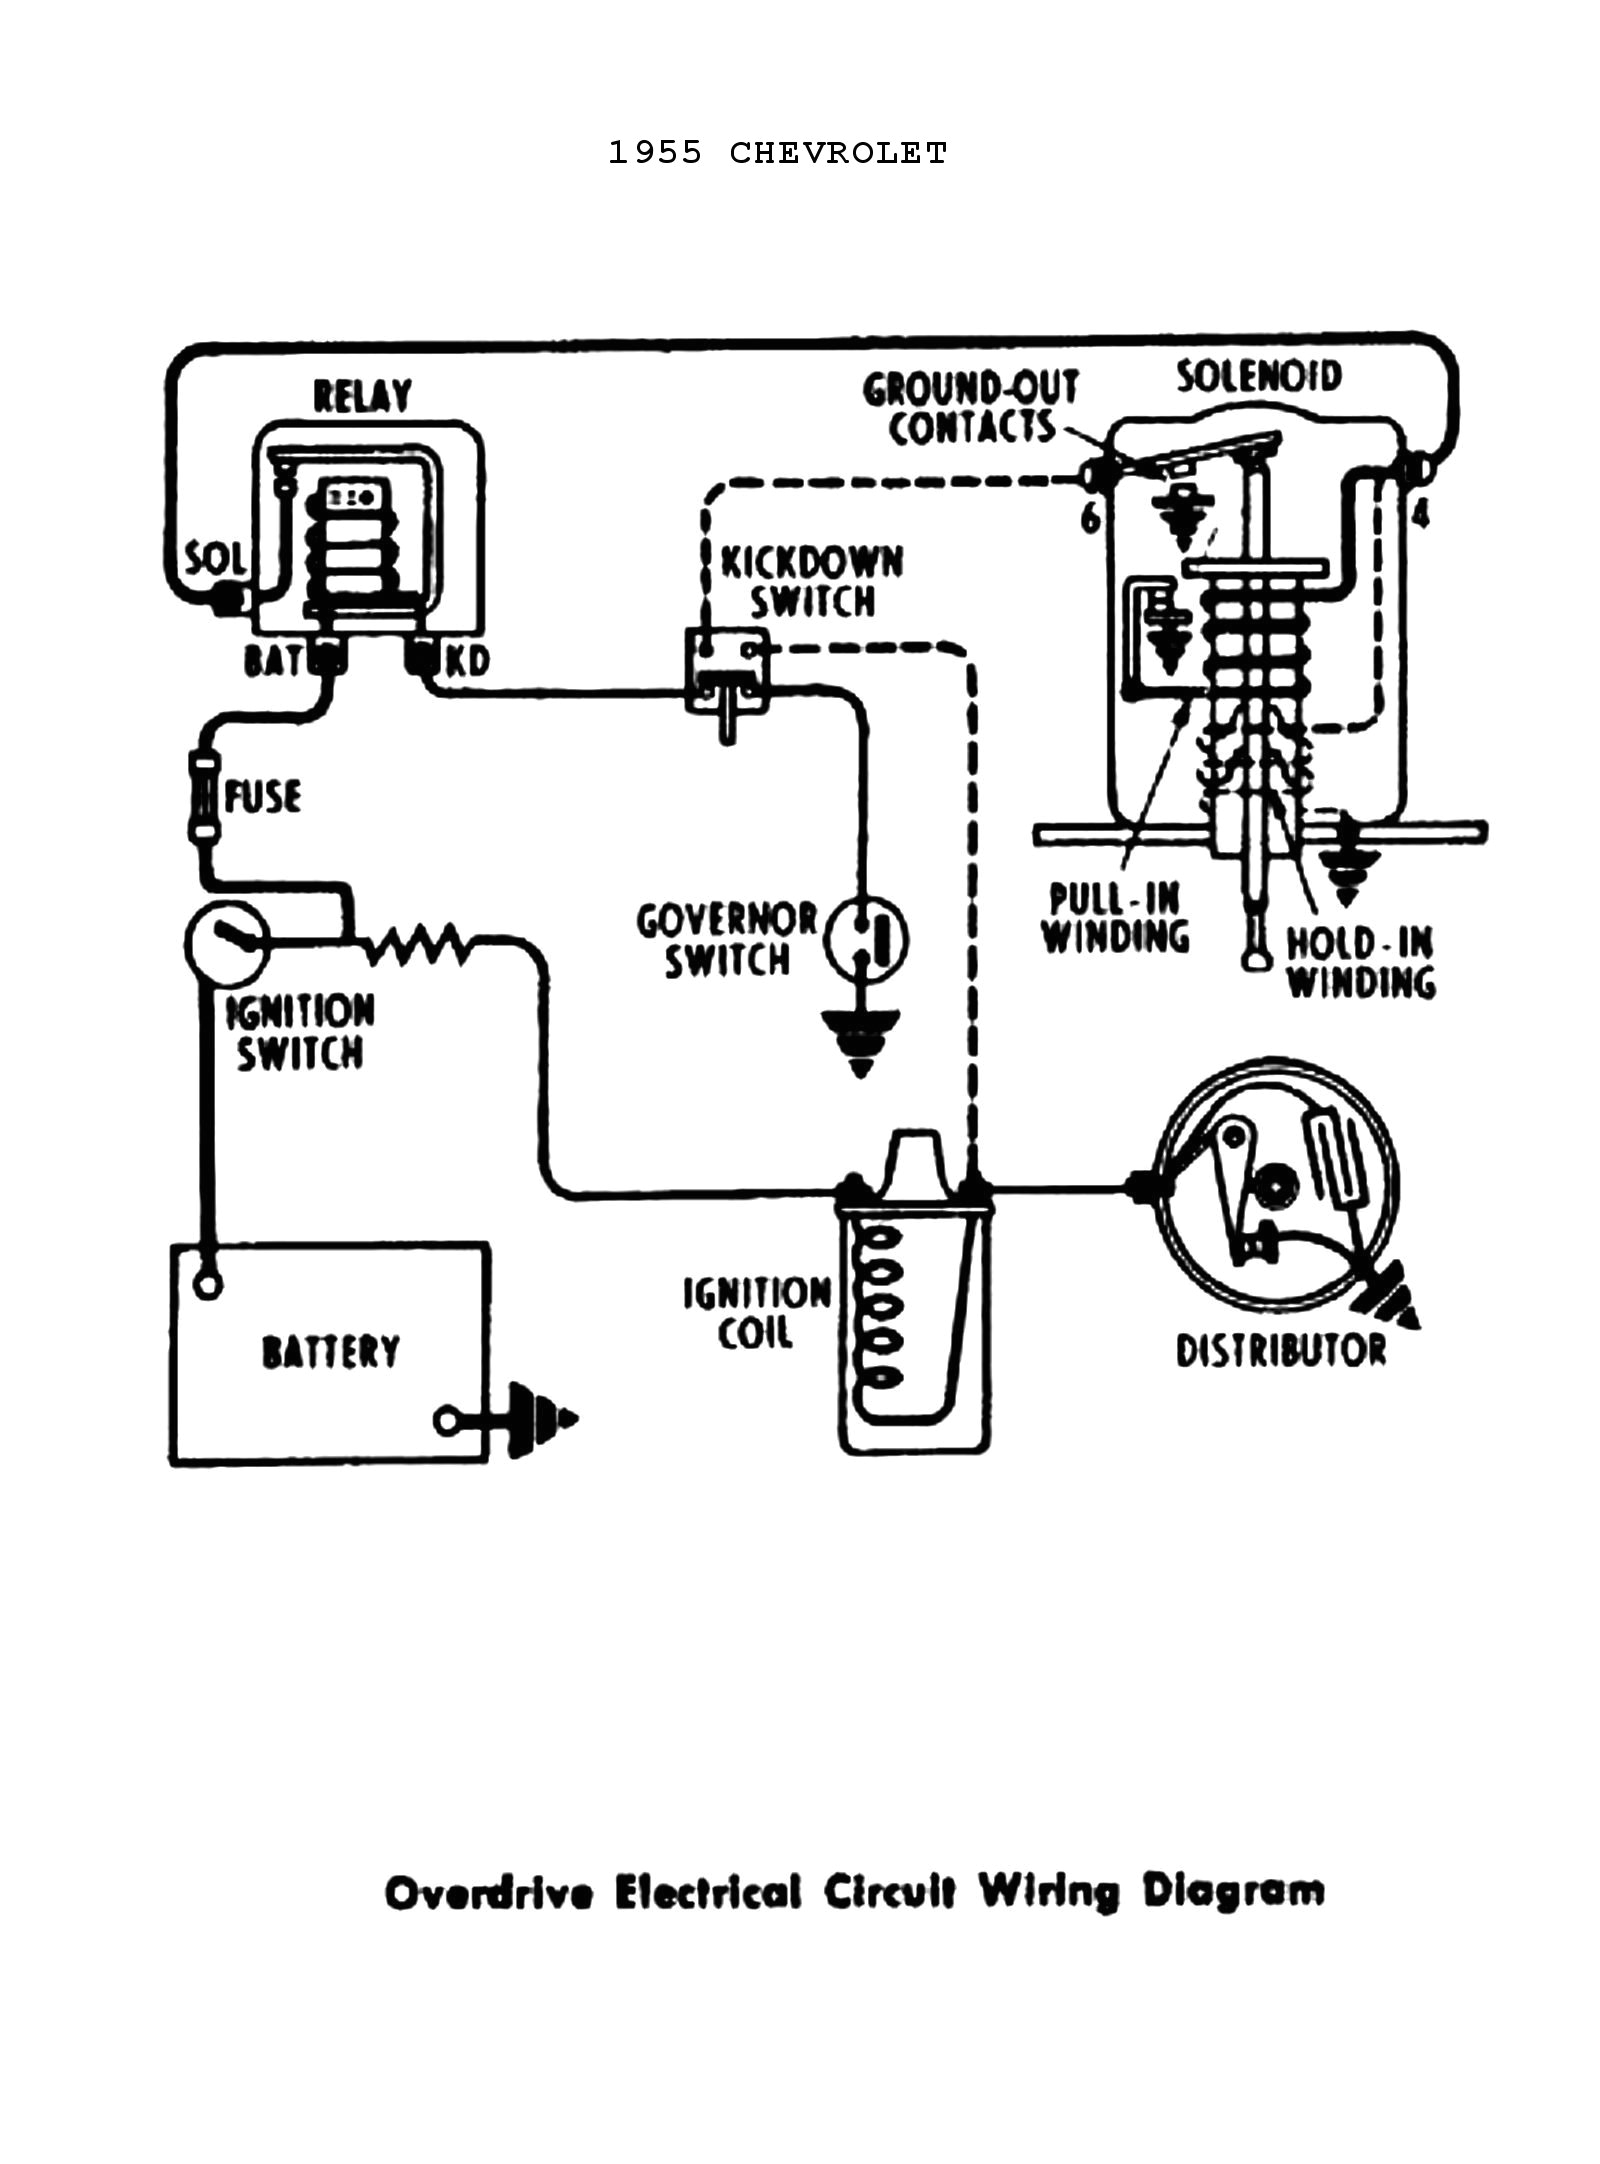 1950 chevy ignition switch wiring wiring diagram show car ignition wiring chevy truck switch diagram